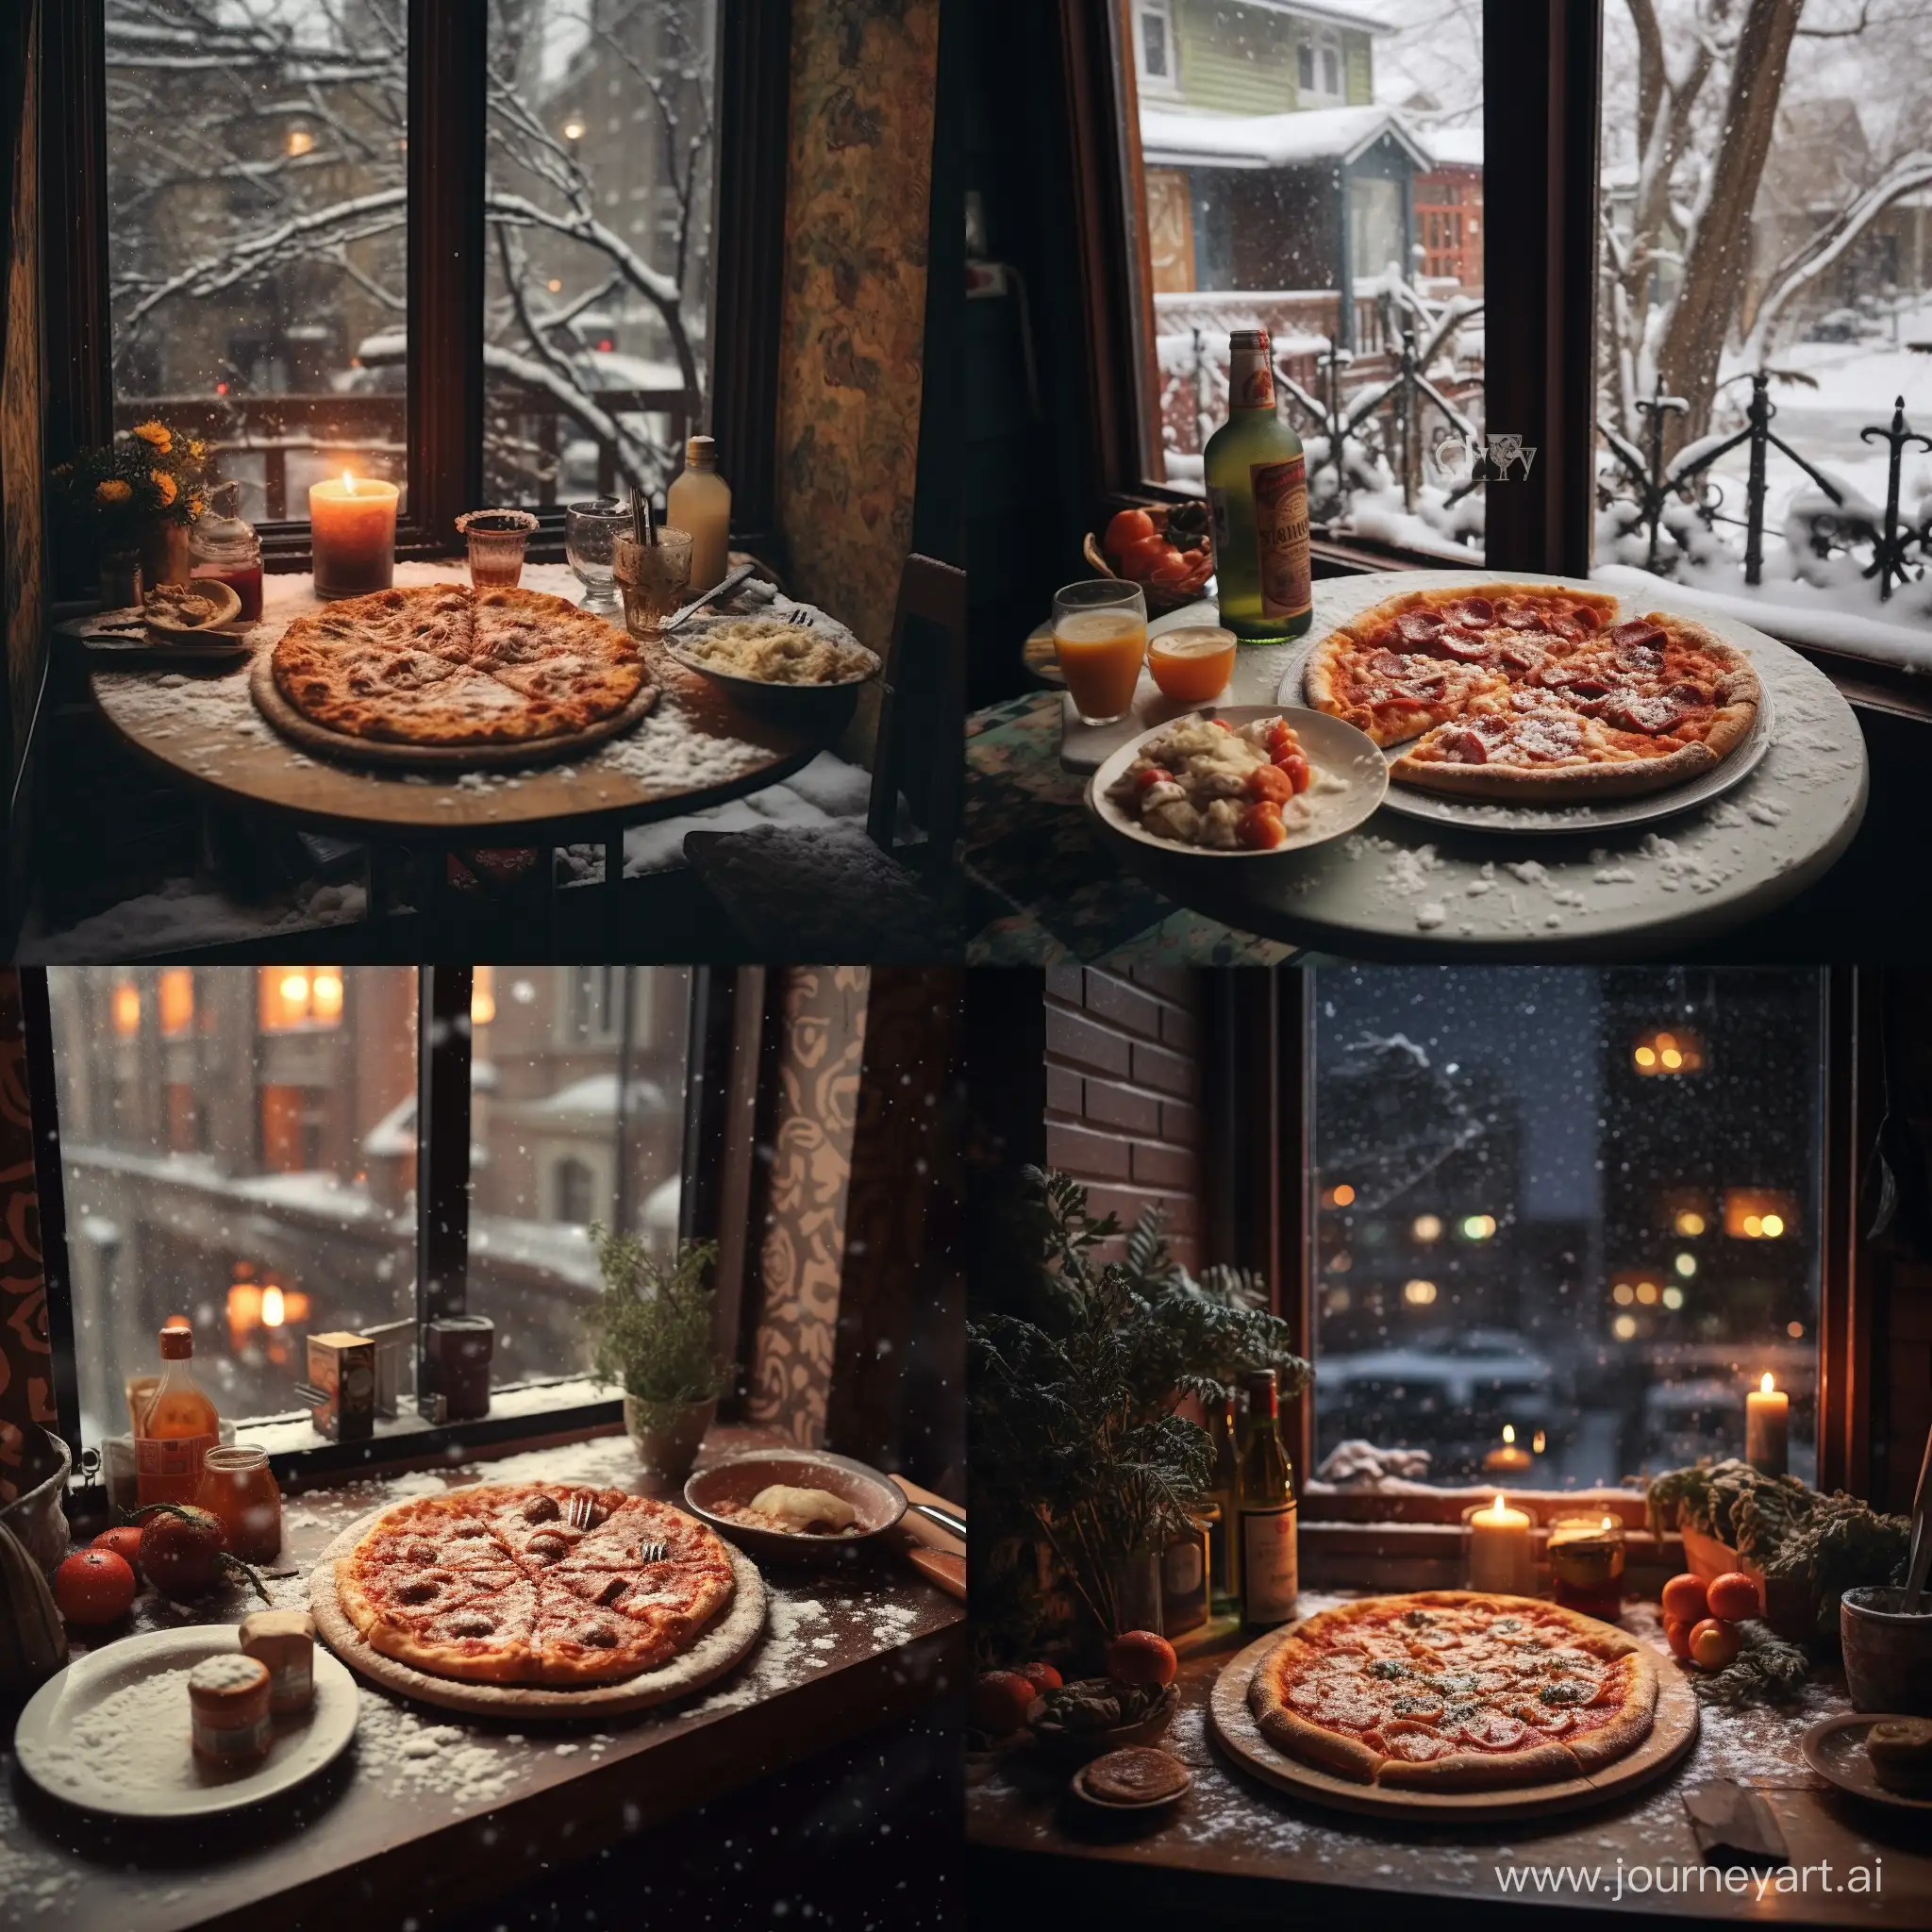 Cozy-Winter-Evening-with-Pizza-and-Snowfall